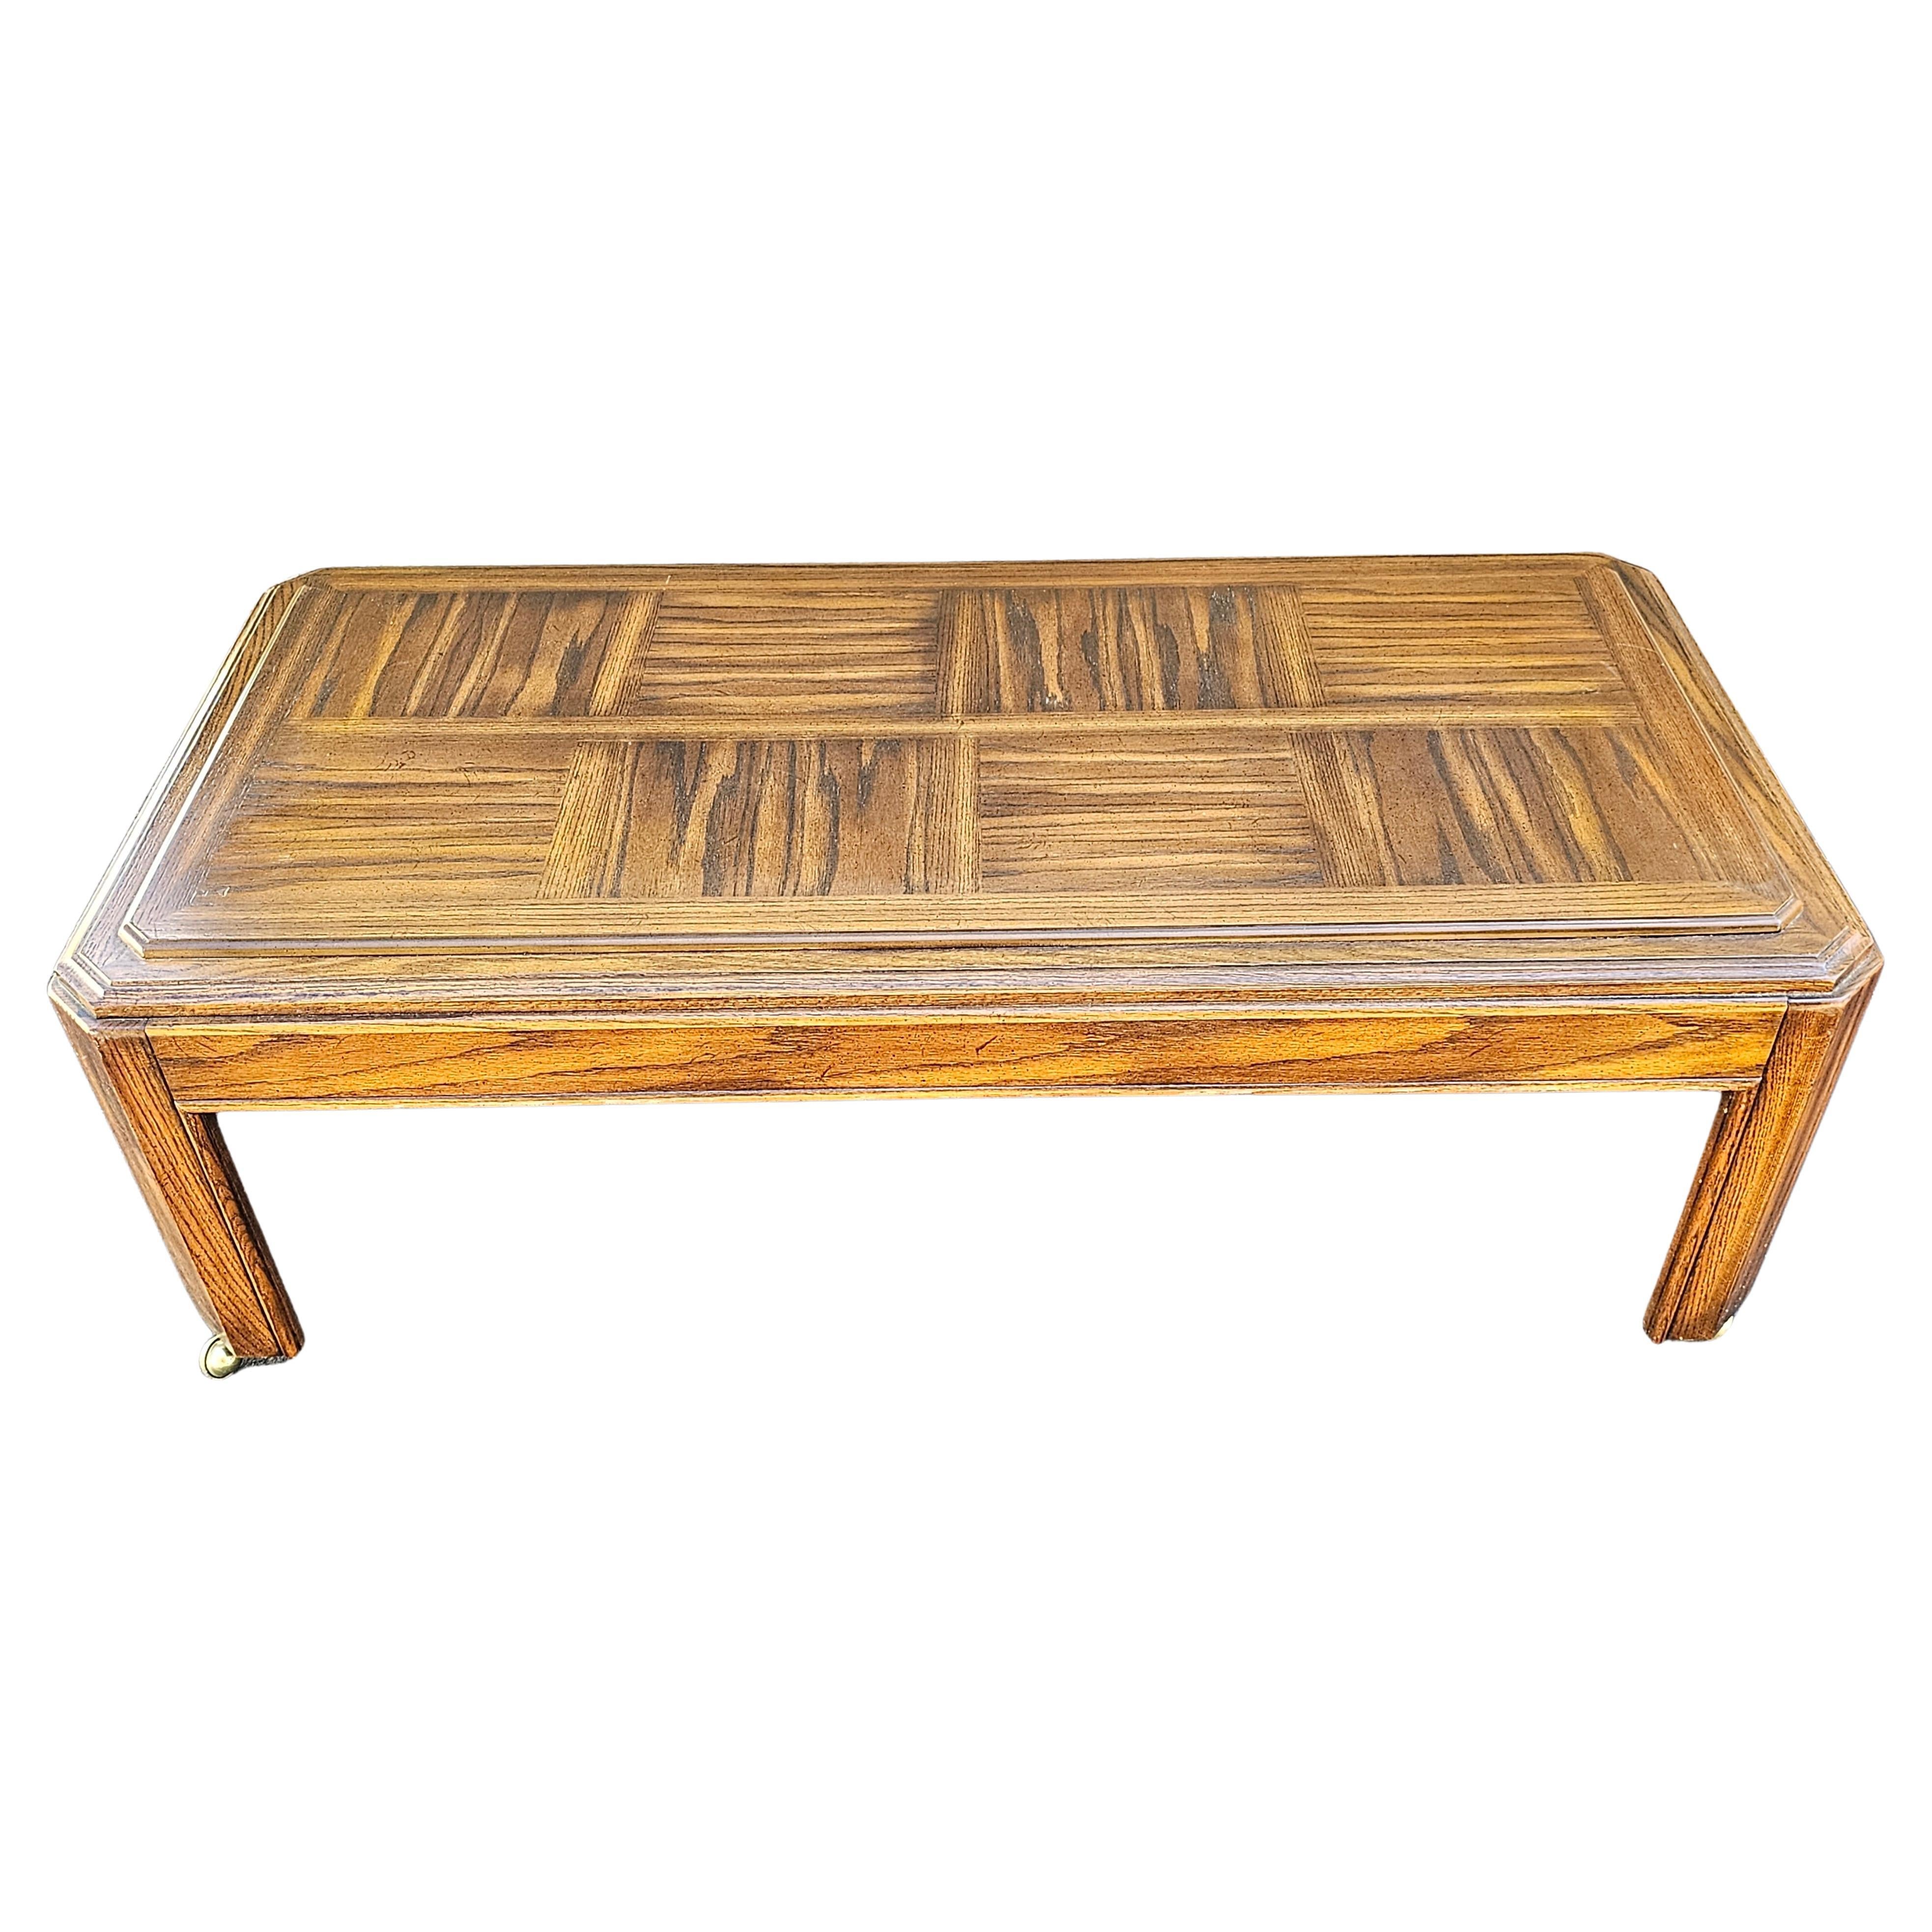 Late 20th Century Oak Parquetry Top Coffee Table on Casters